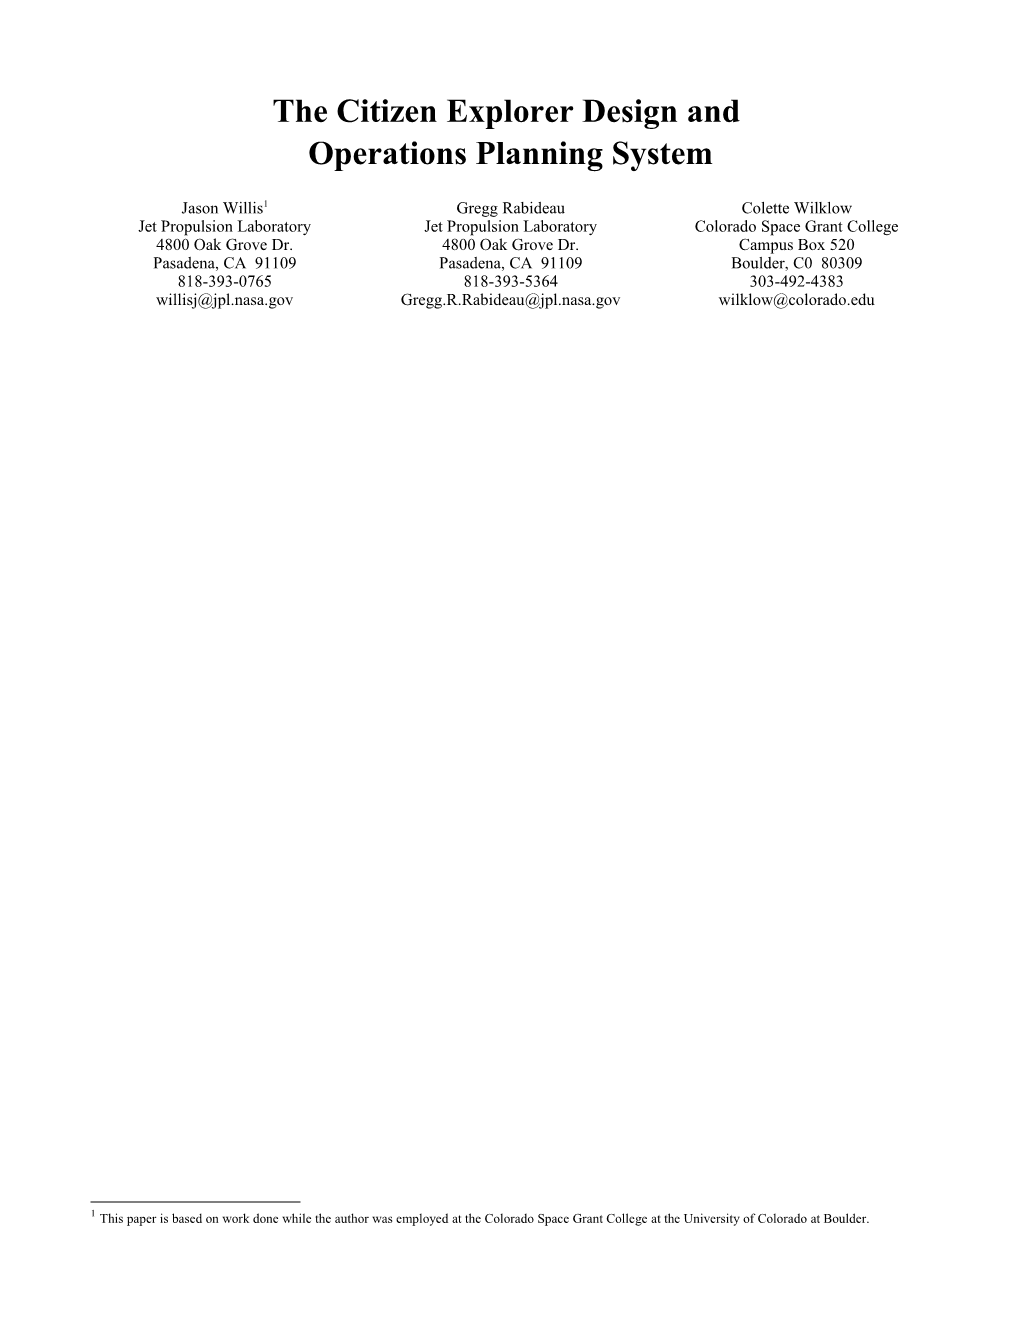 The Citizen Explorer Design and Operations Planning System